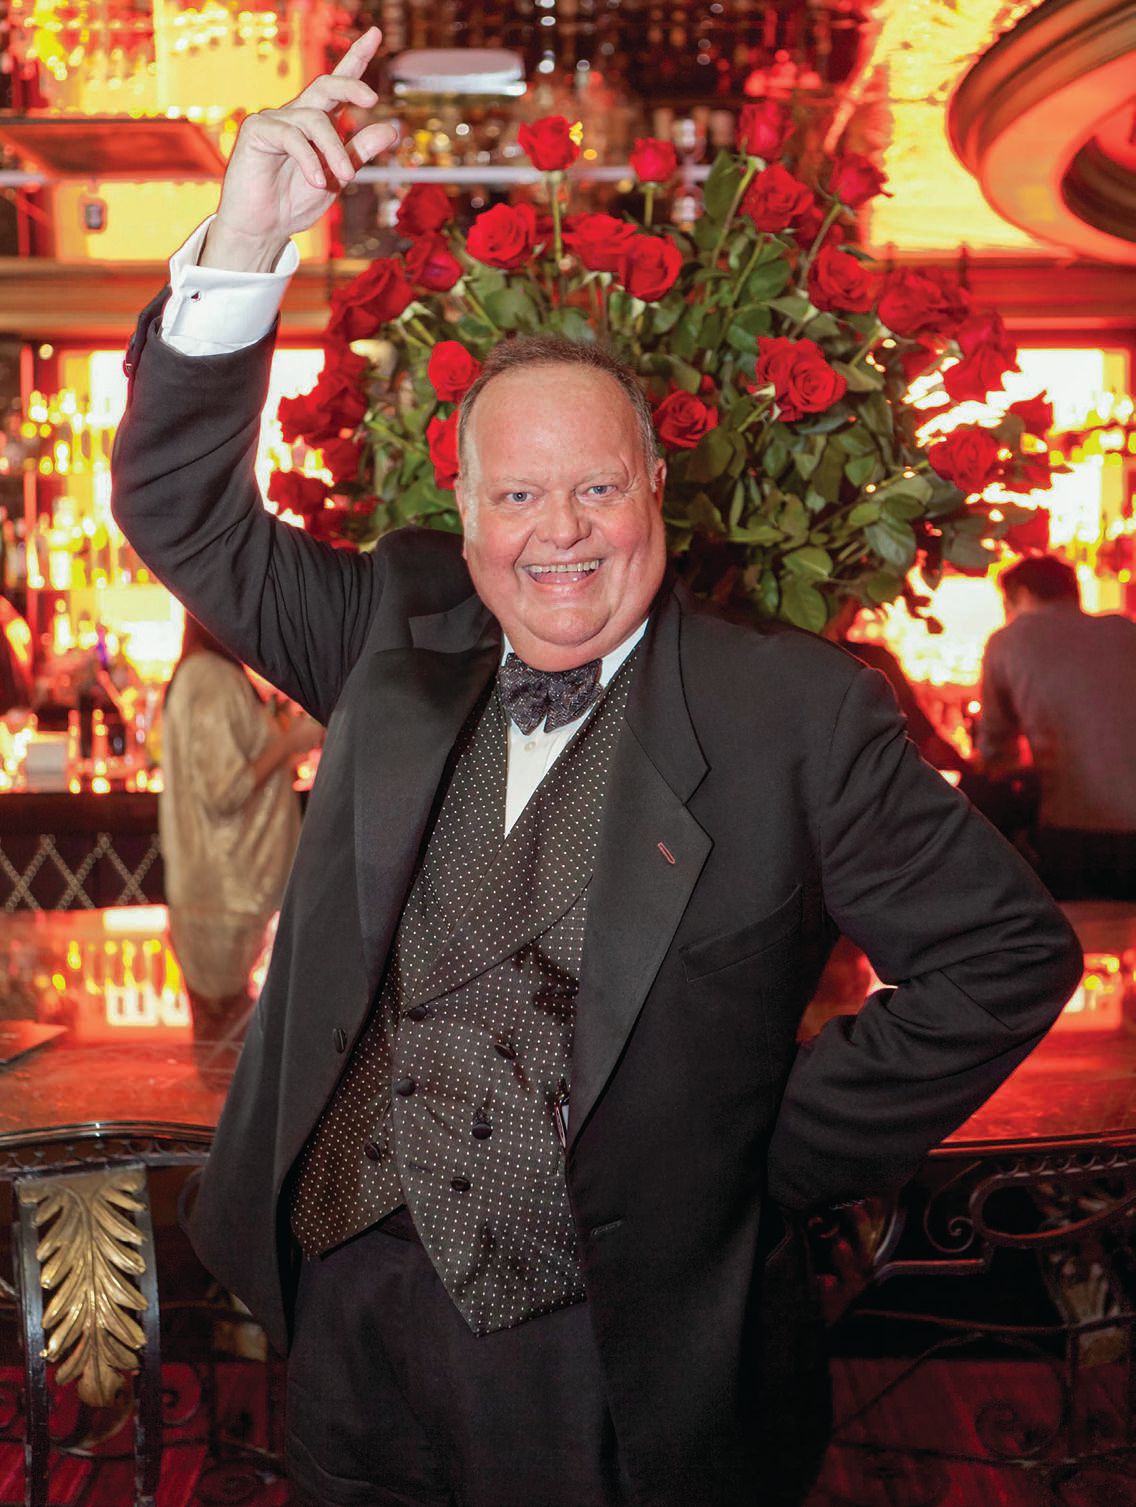 Harry Denton, photographed in 2011, during the relaunch of the Starlight Room PHOTO BY DREW ALTIZER